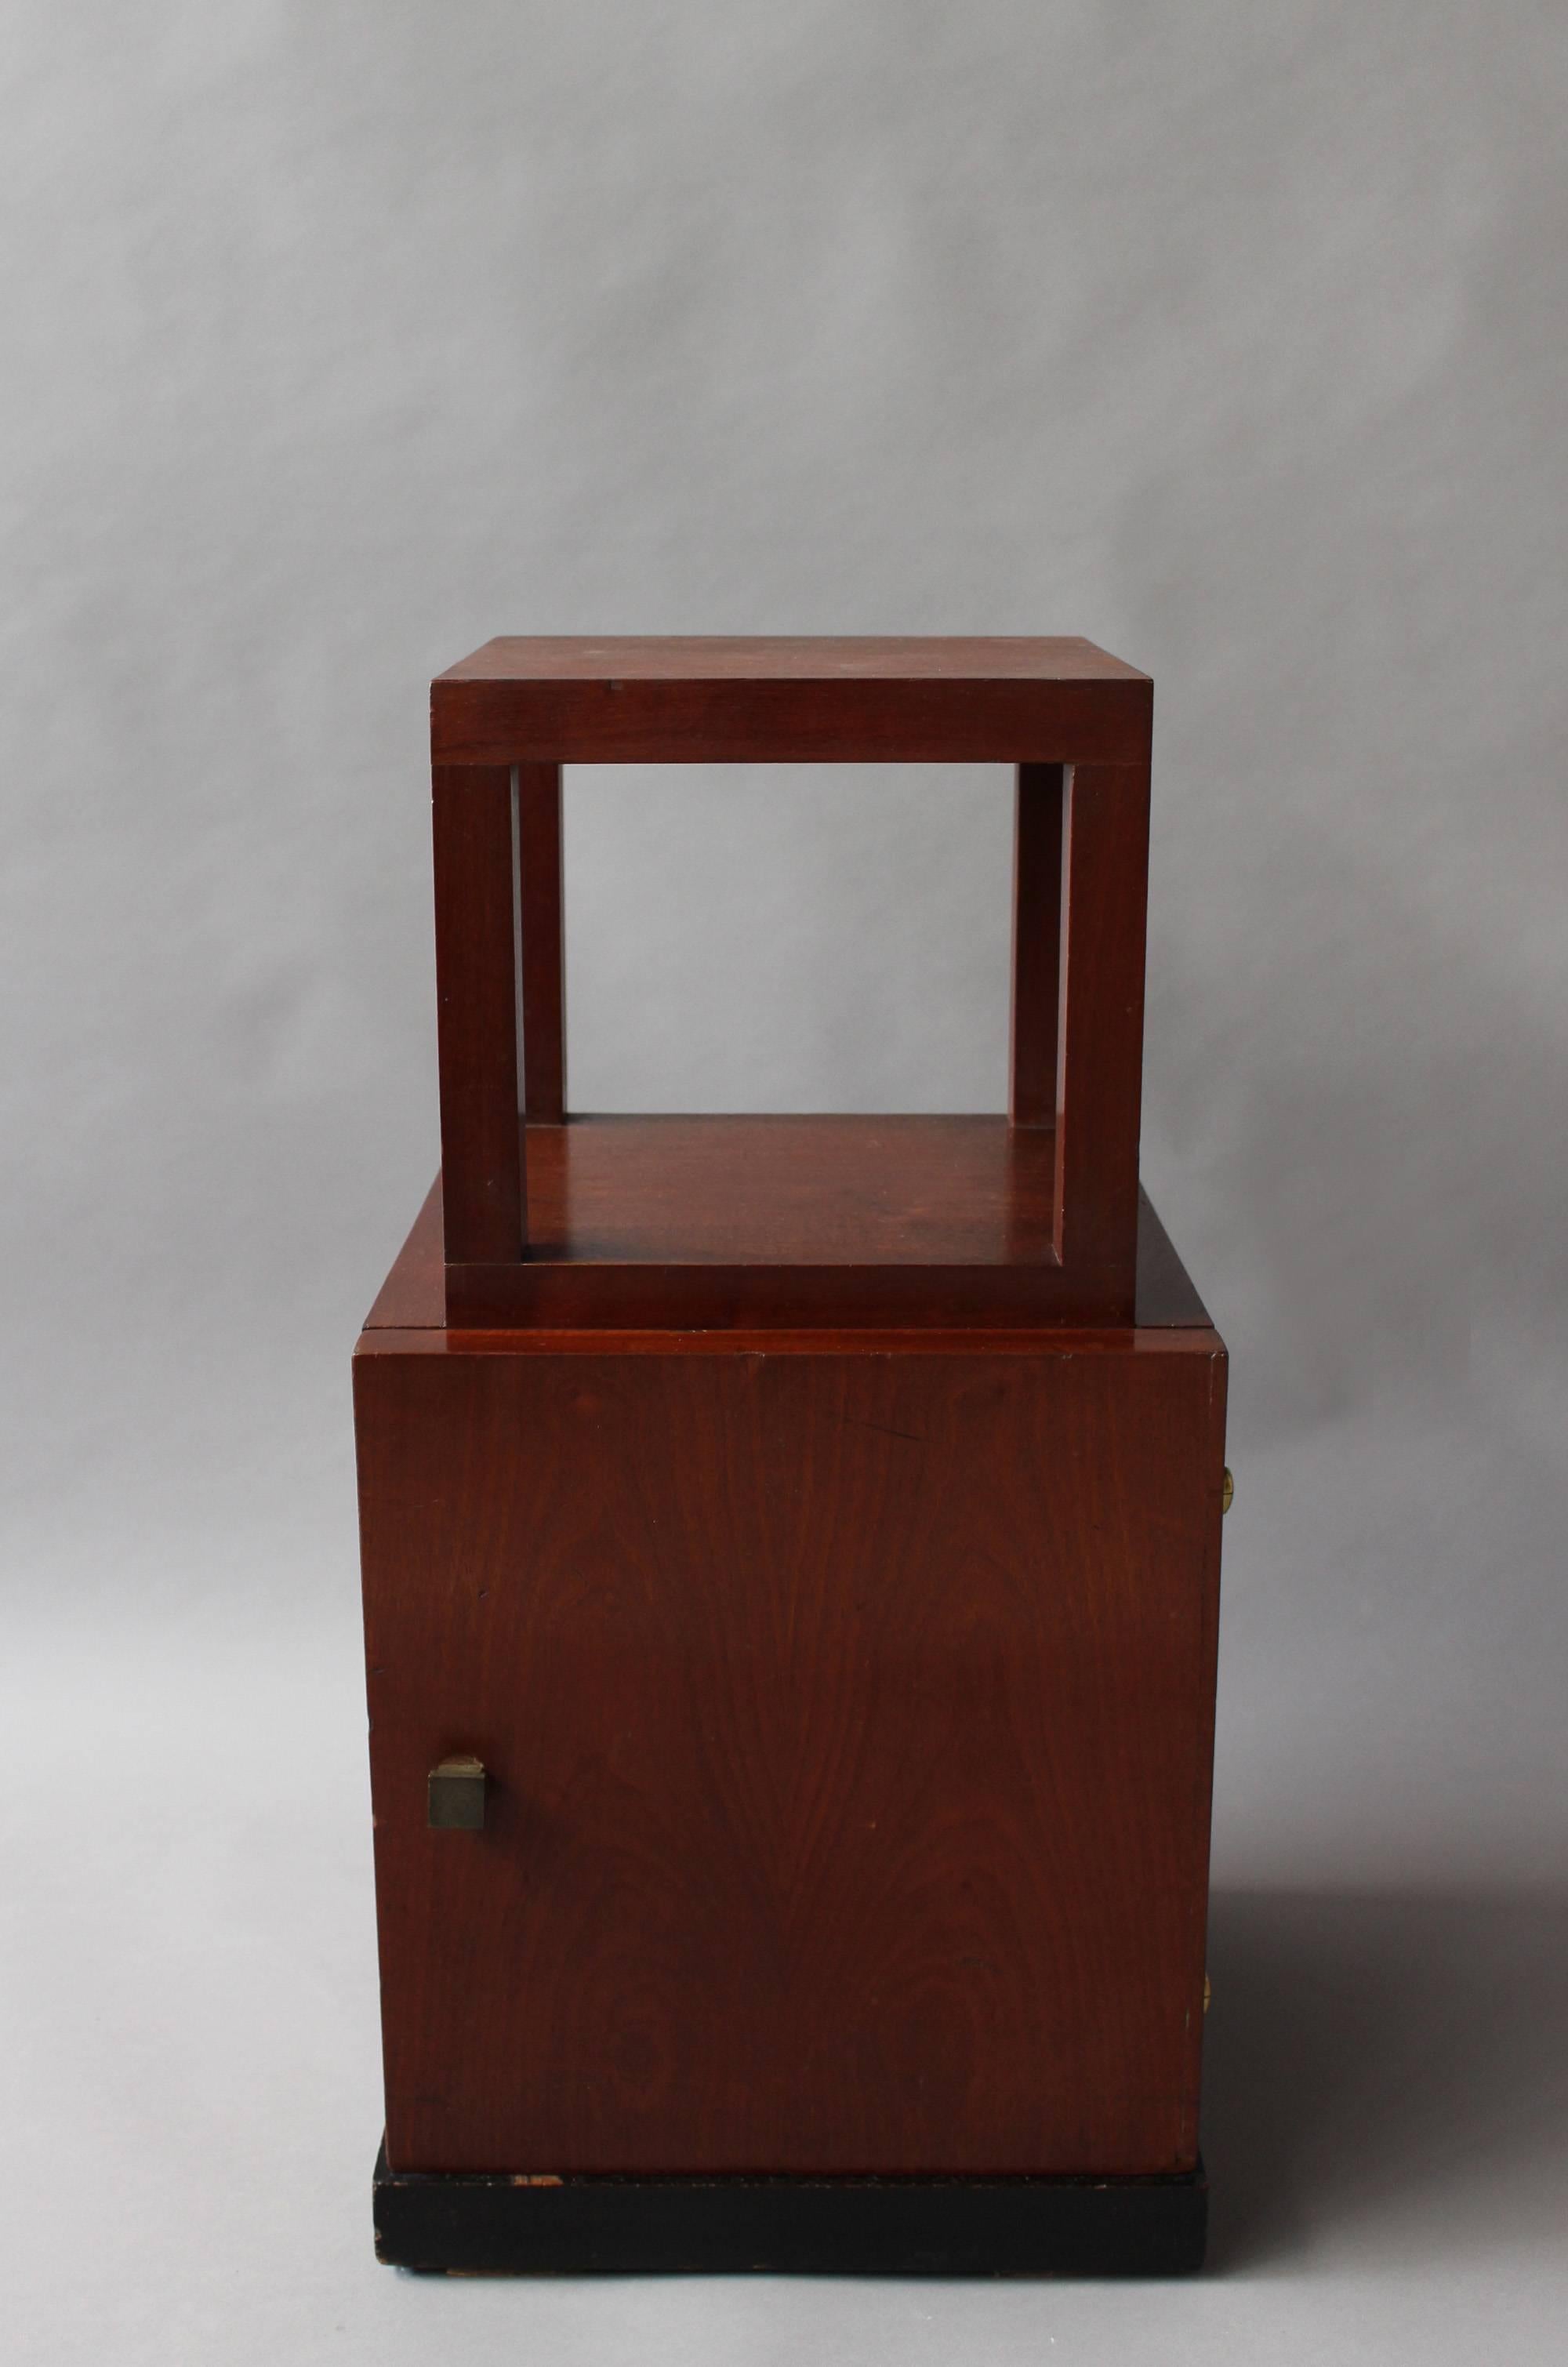 French Art Deco two-tier mahogany side table/nightstand with a pull out shelf and brass details.
     